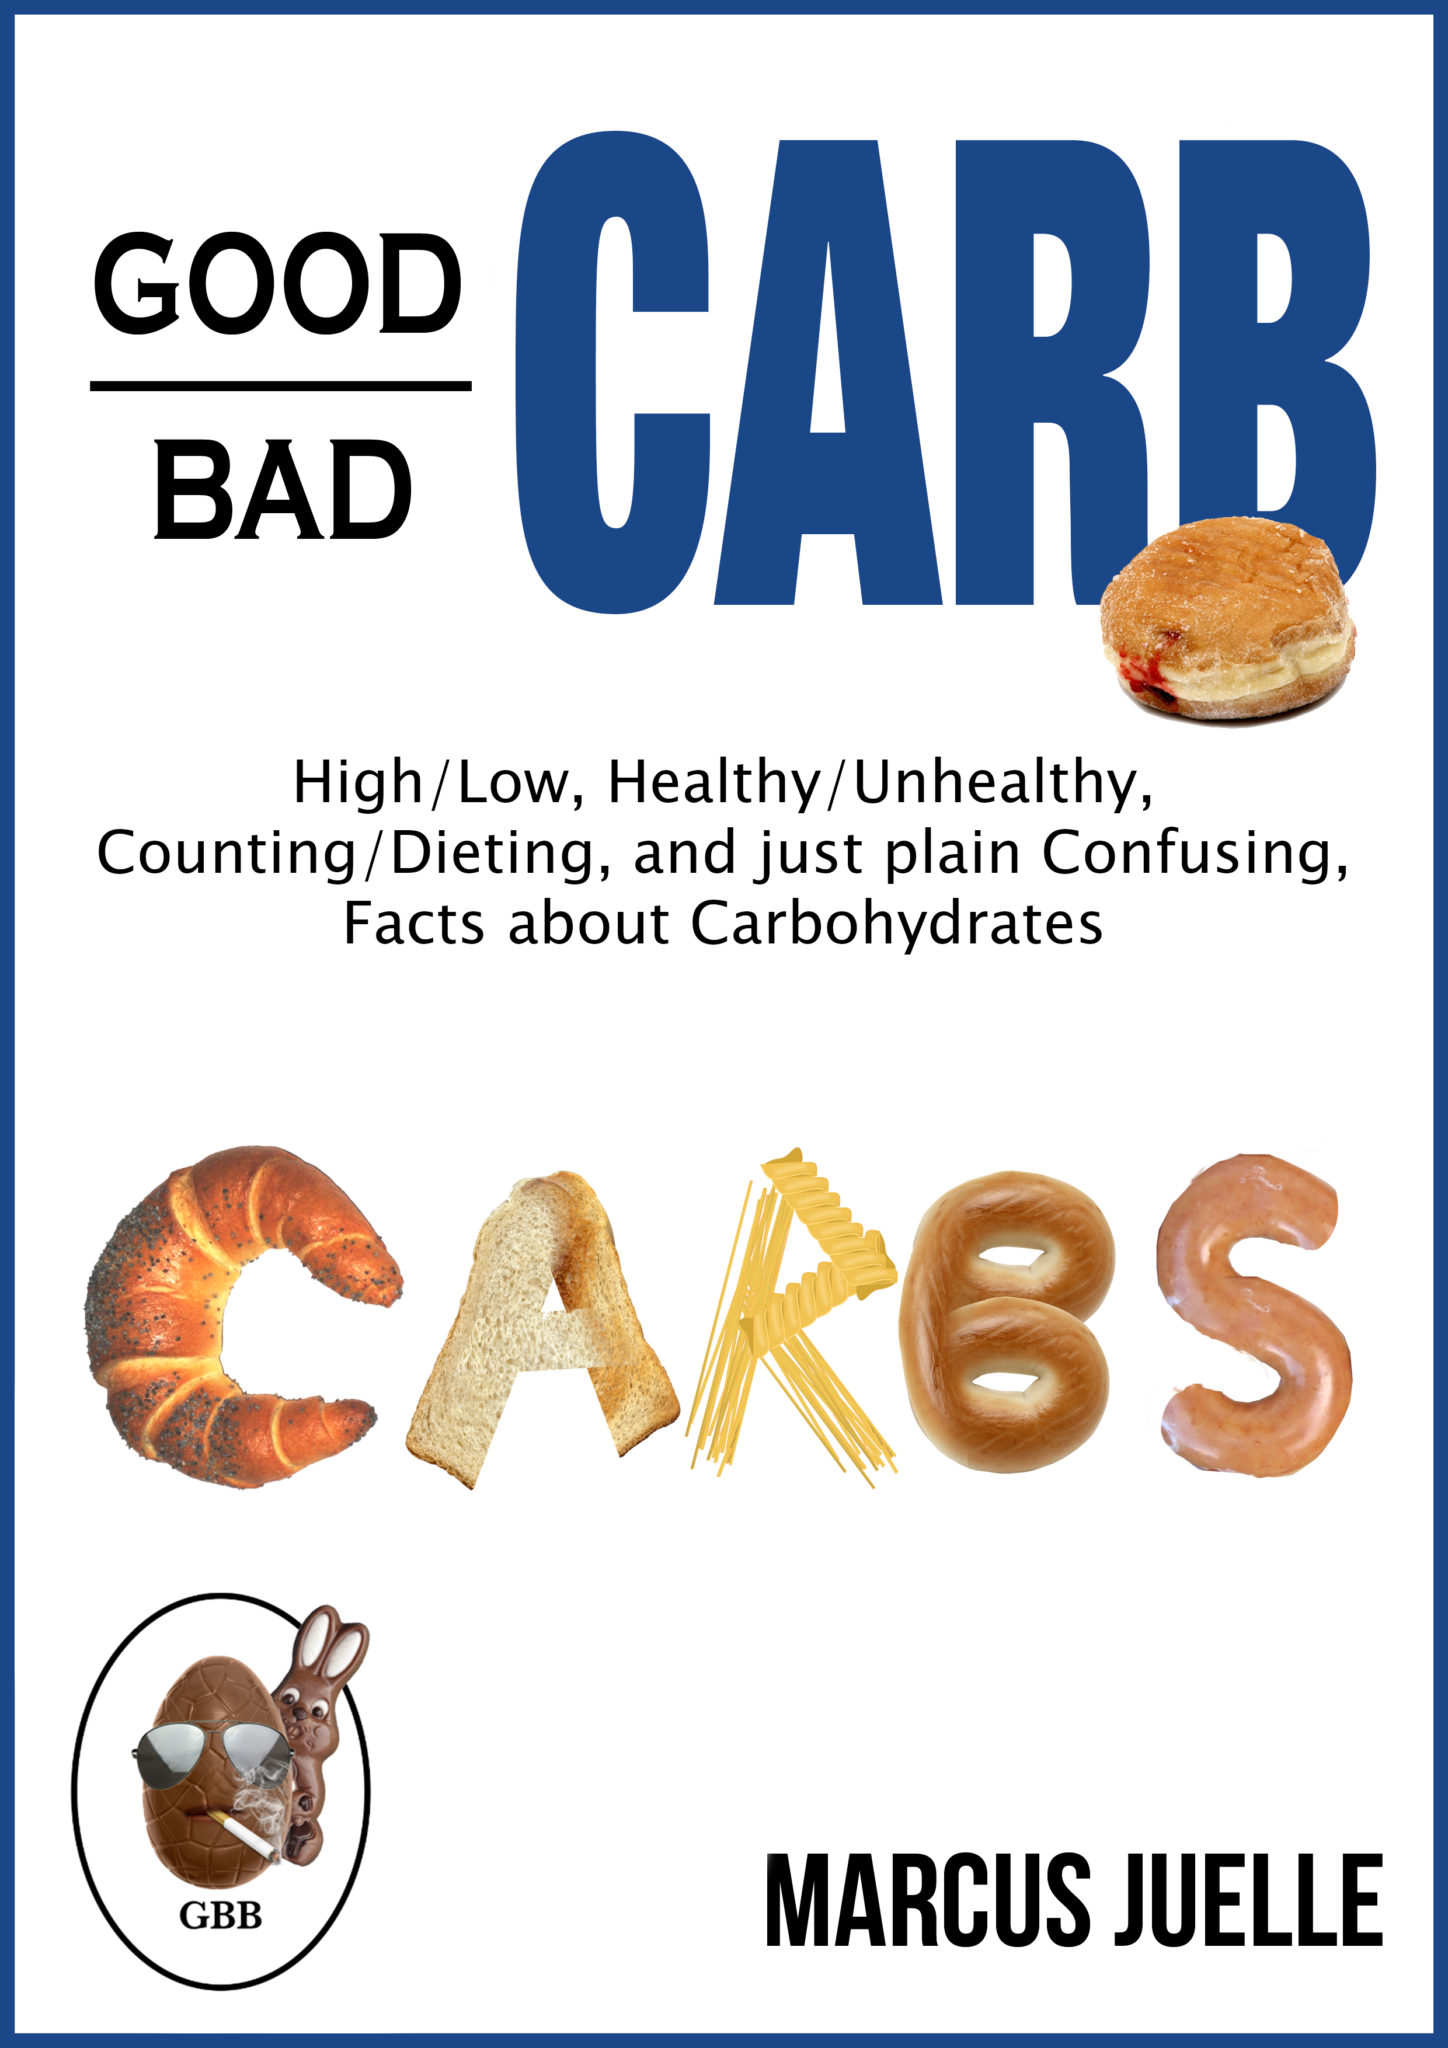 FREE: Good Carb Bad Carb by Marcus Juelle